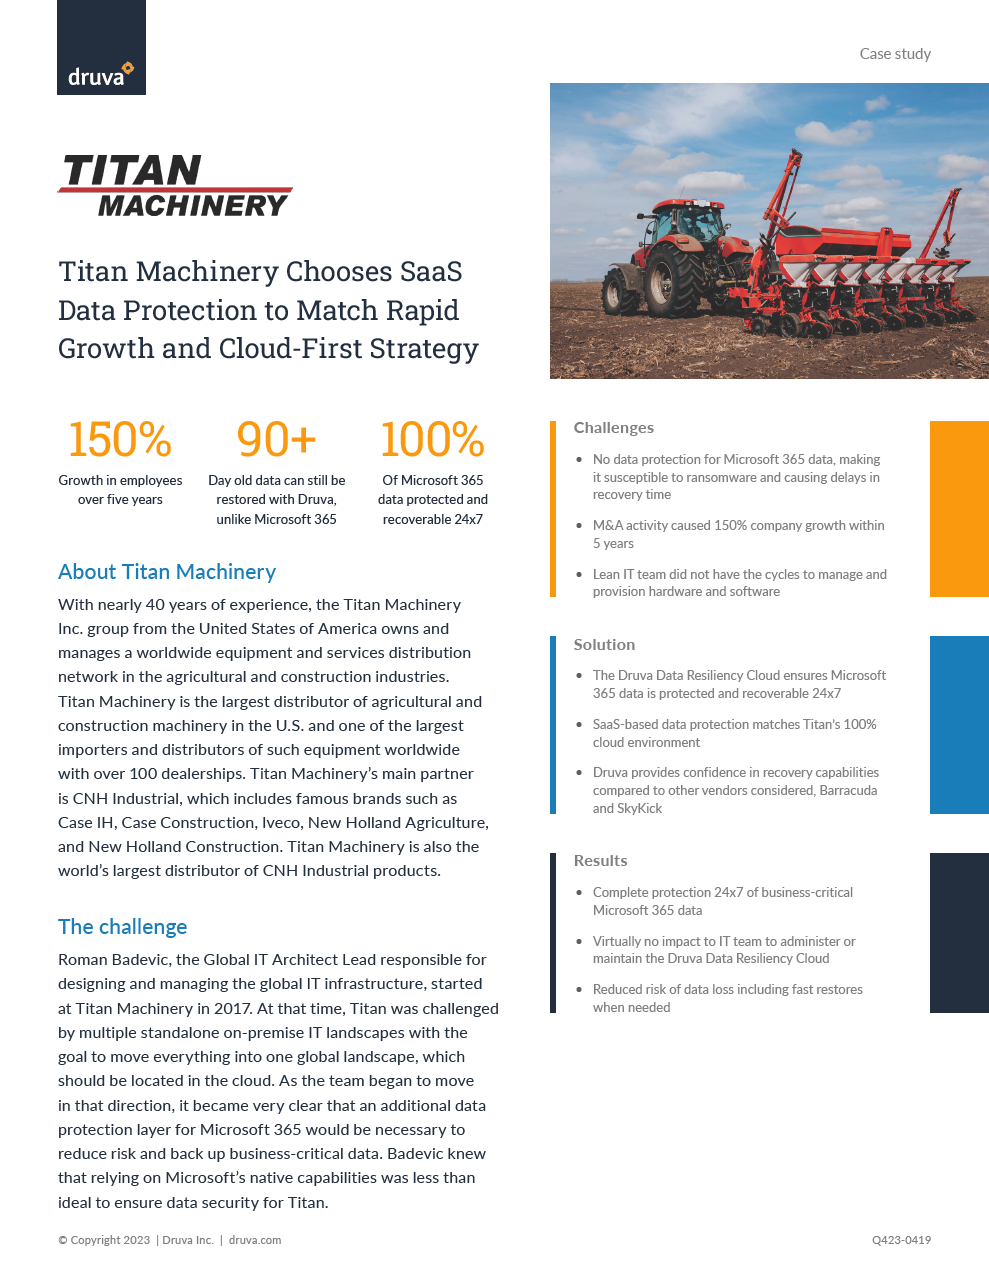 Titan Machinery Chooses SaaS Data Protection to Match Rapid Growth and Cloud-First Strategy